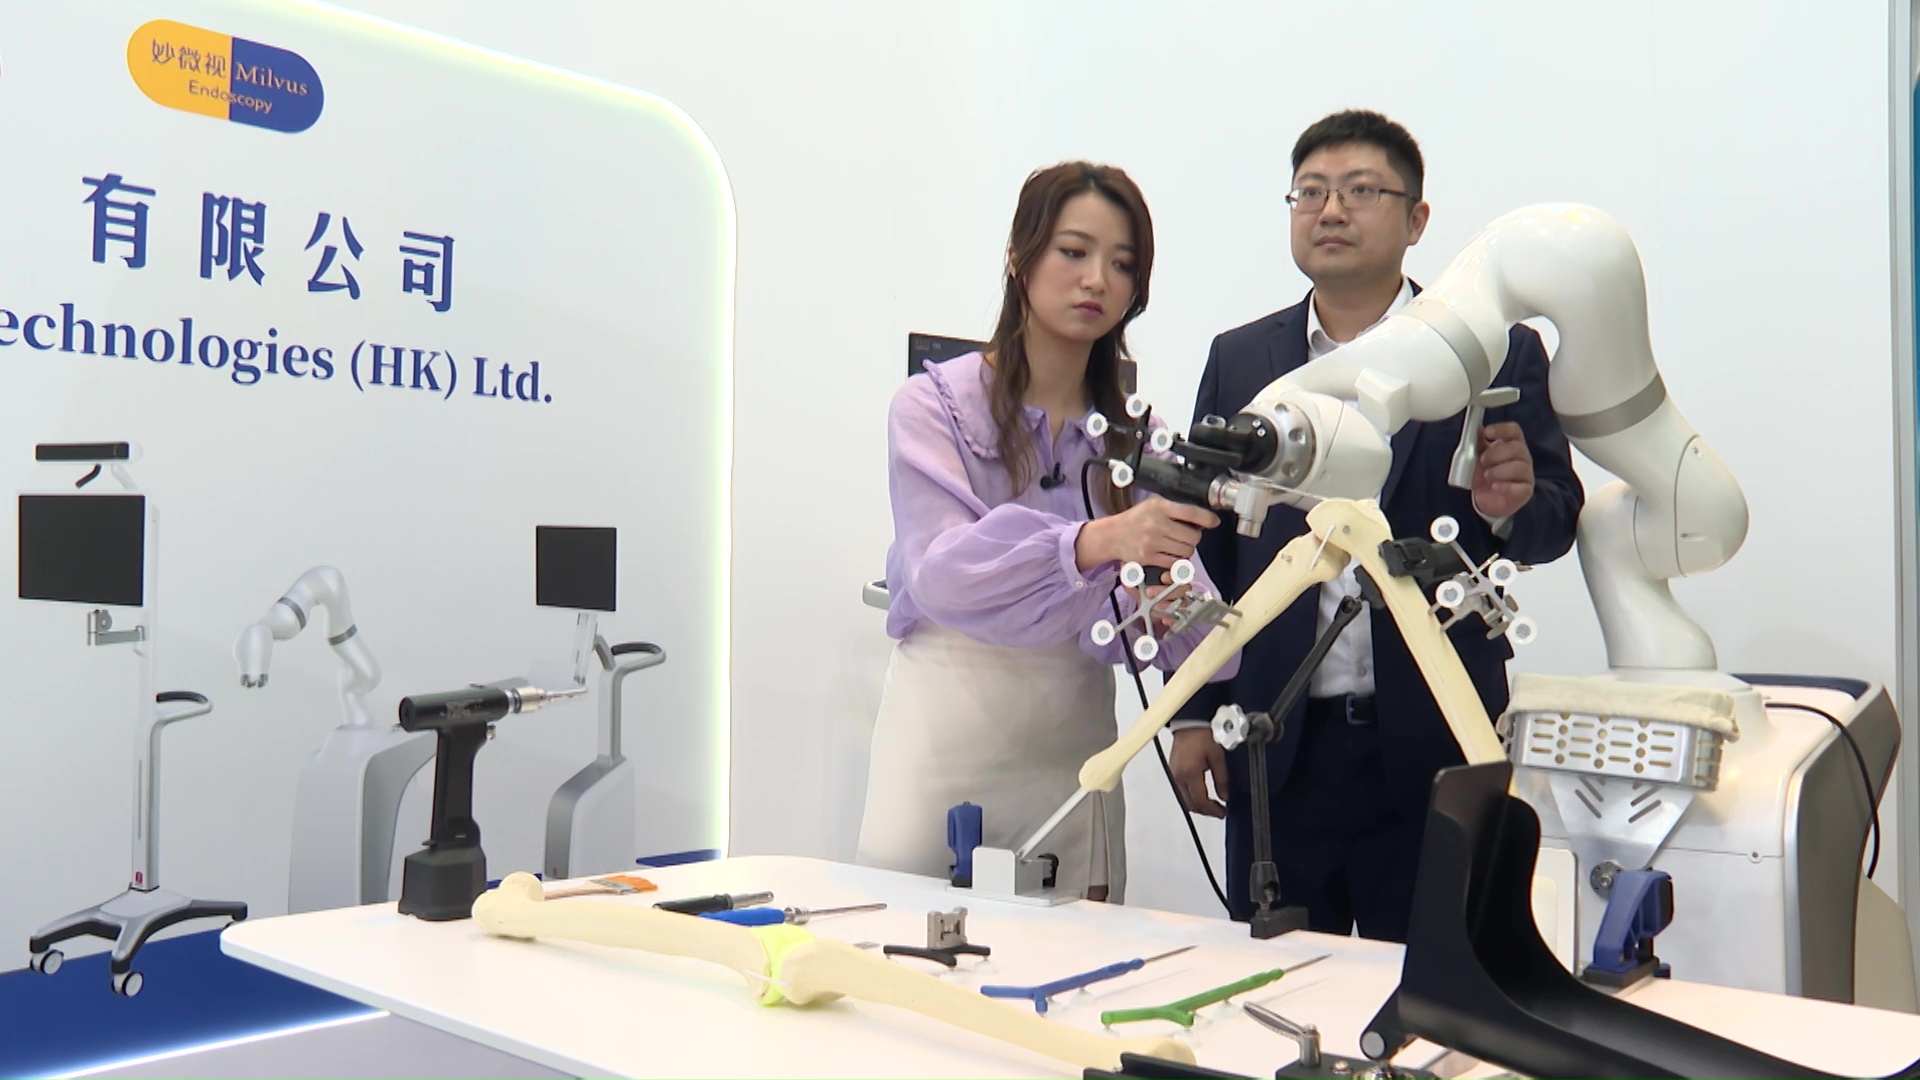 One of the exhibitors at the Asia Summit on Global Health presented their medical device designed to perform surgeries.